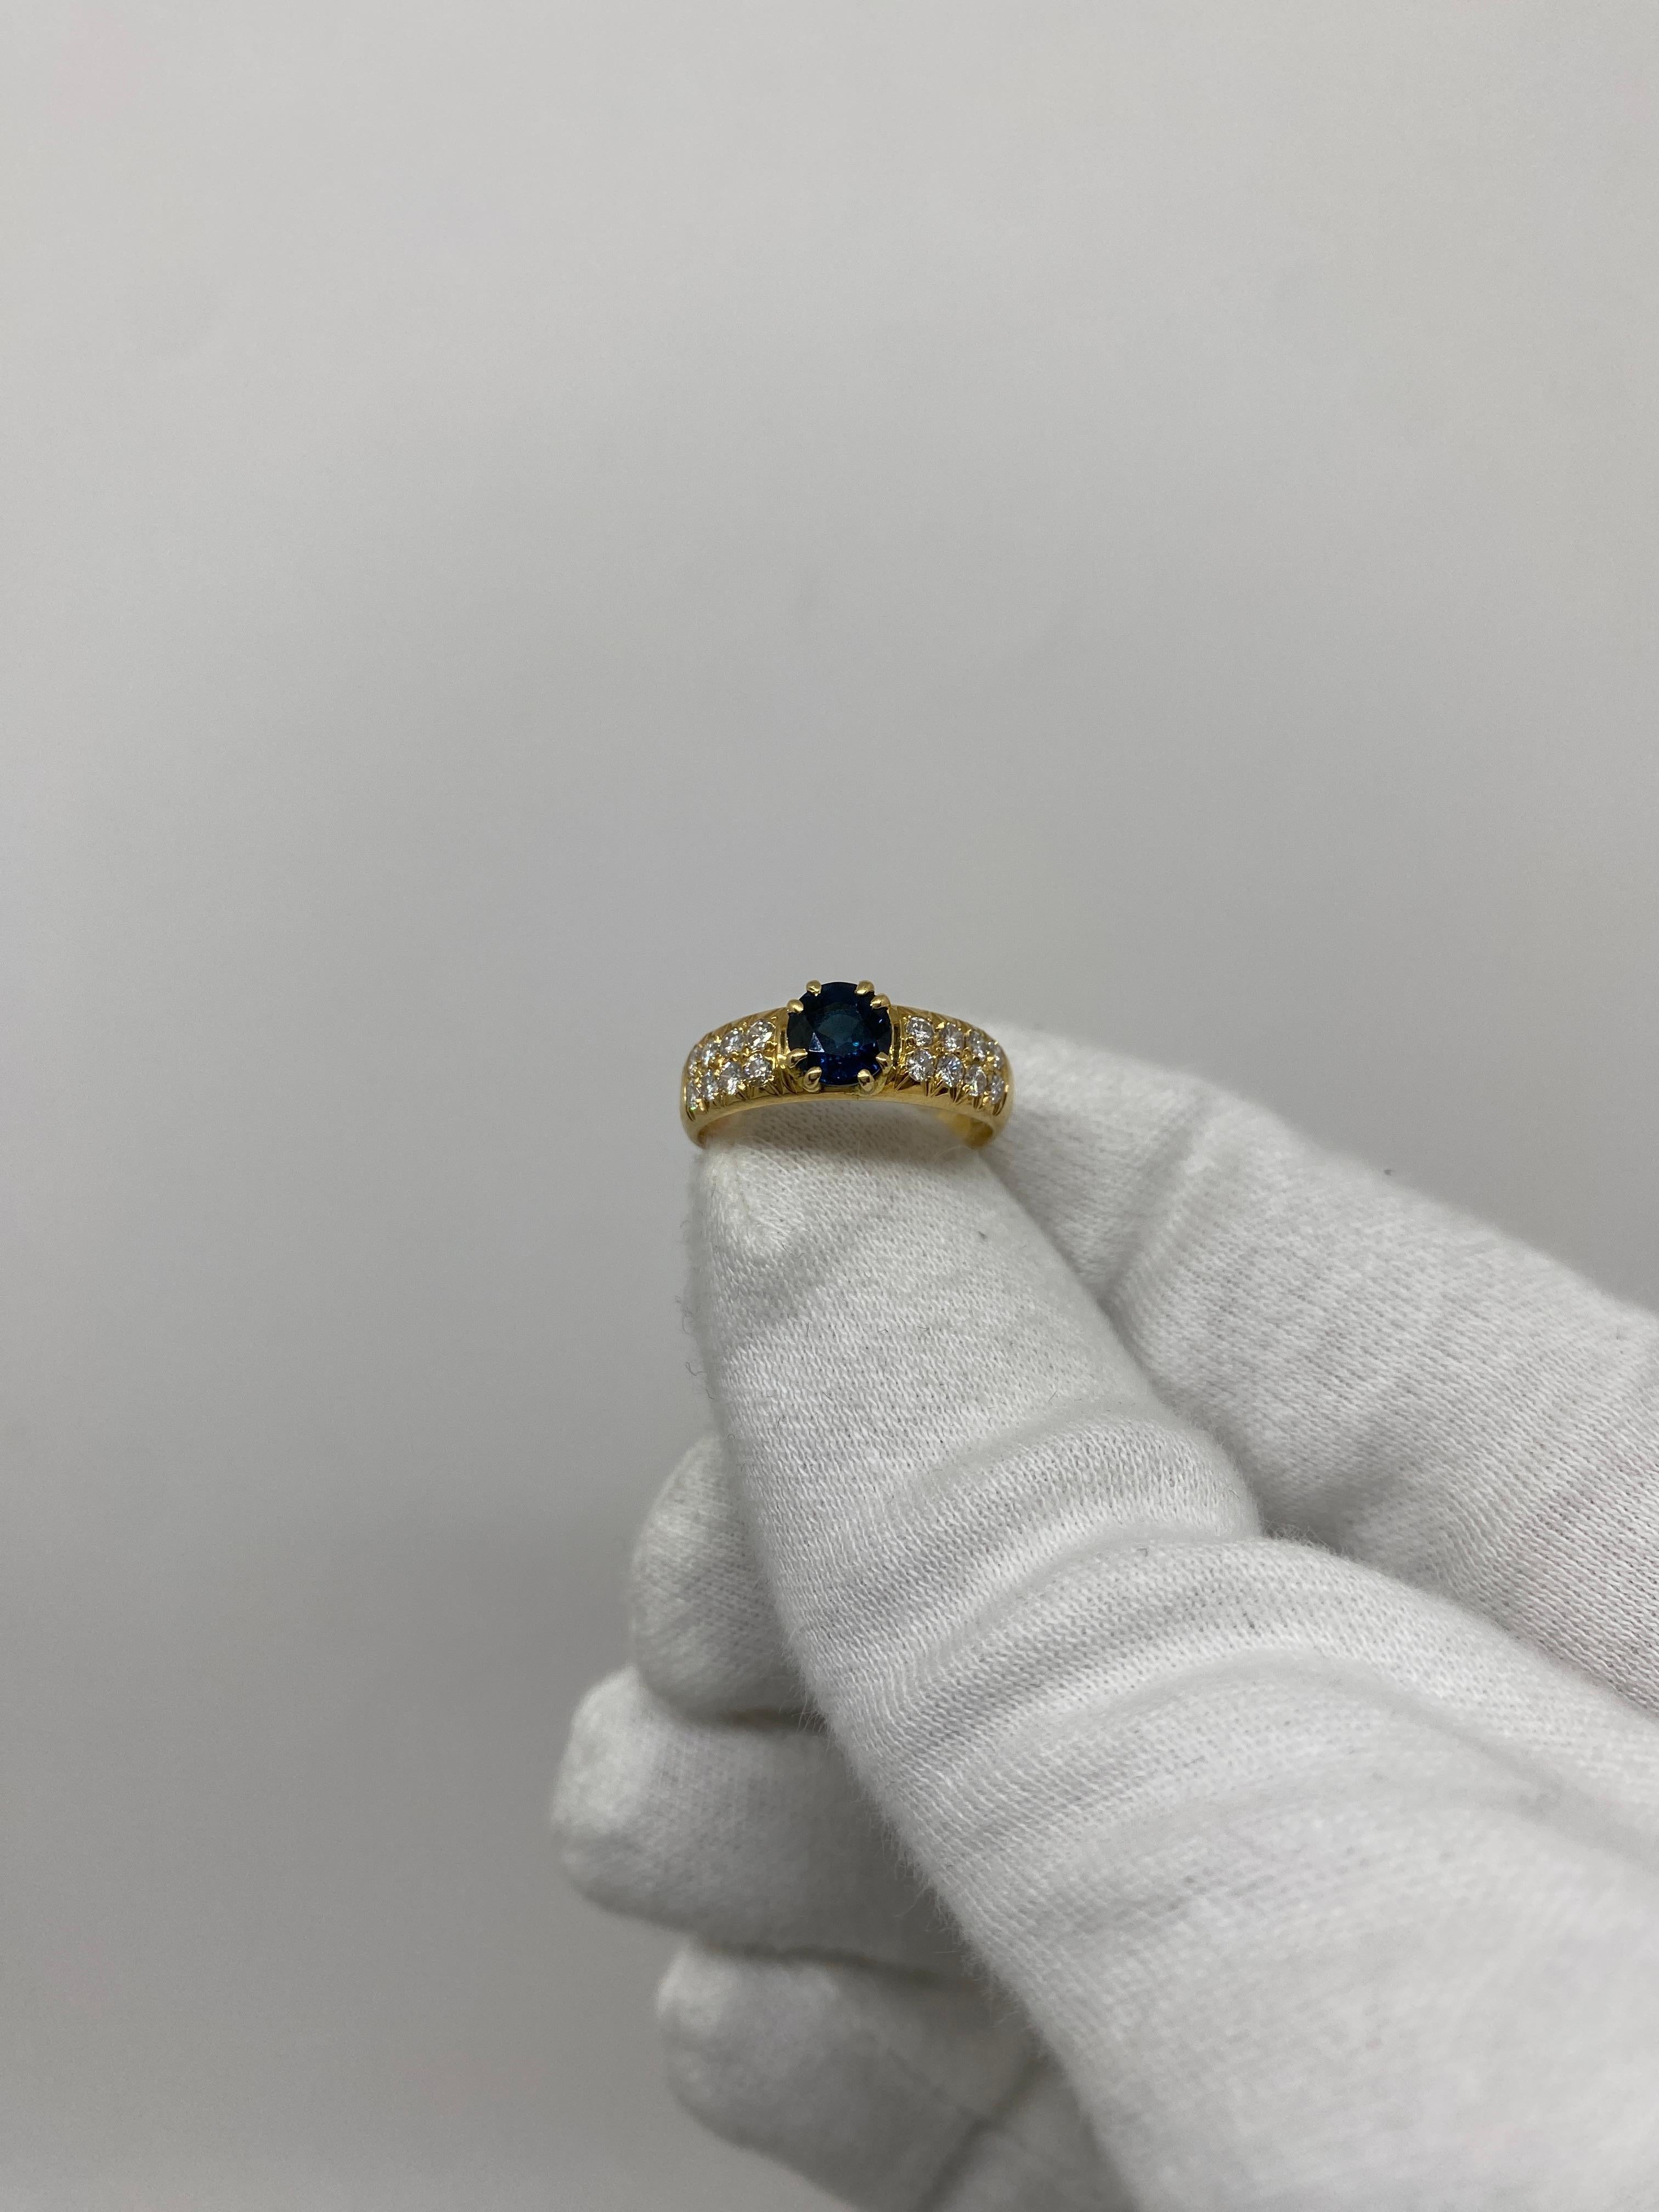 Ring made of 18kt yellow gold with brilliant-cut natural diamonds and brilliant-cut blue sapphires

Welcome to our jewelry collection, where every piece tells a story of timeless elegance and unparalleled craftsmanship. As a family-run business in